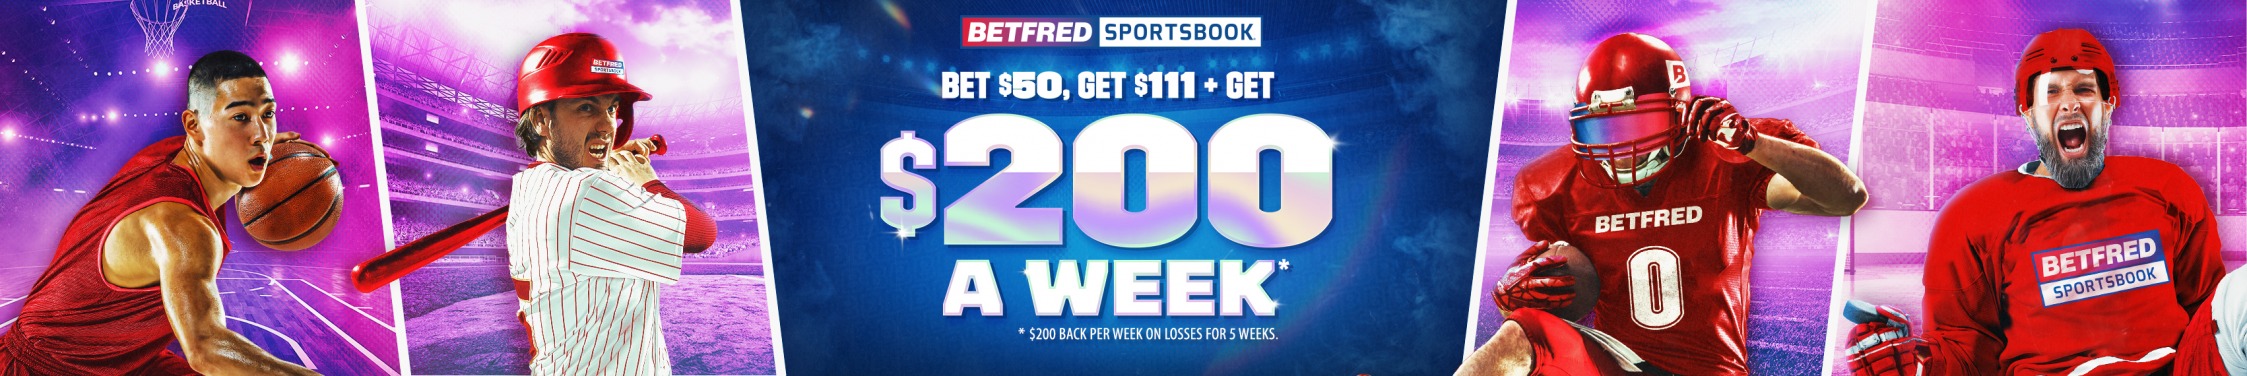 BetFred $1,111 Welcome Offer